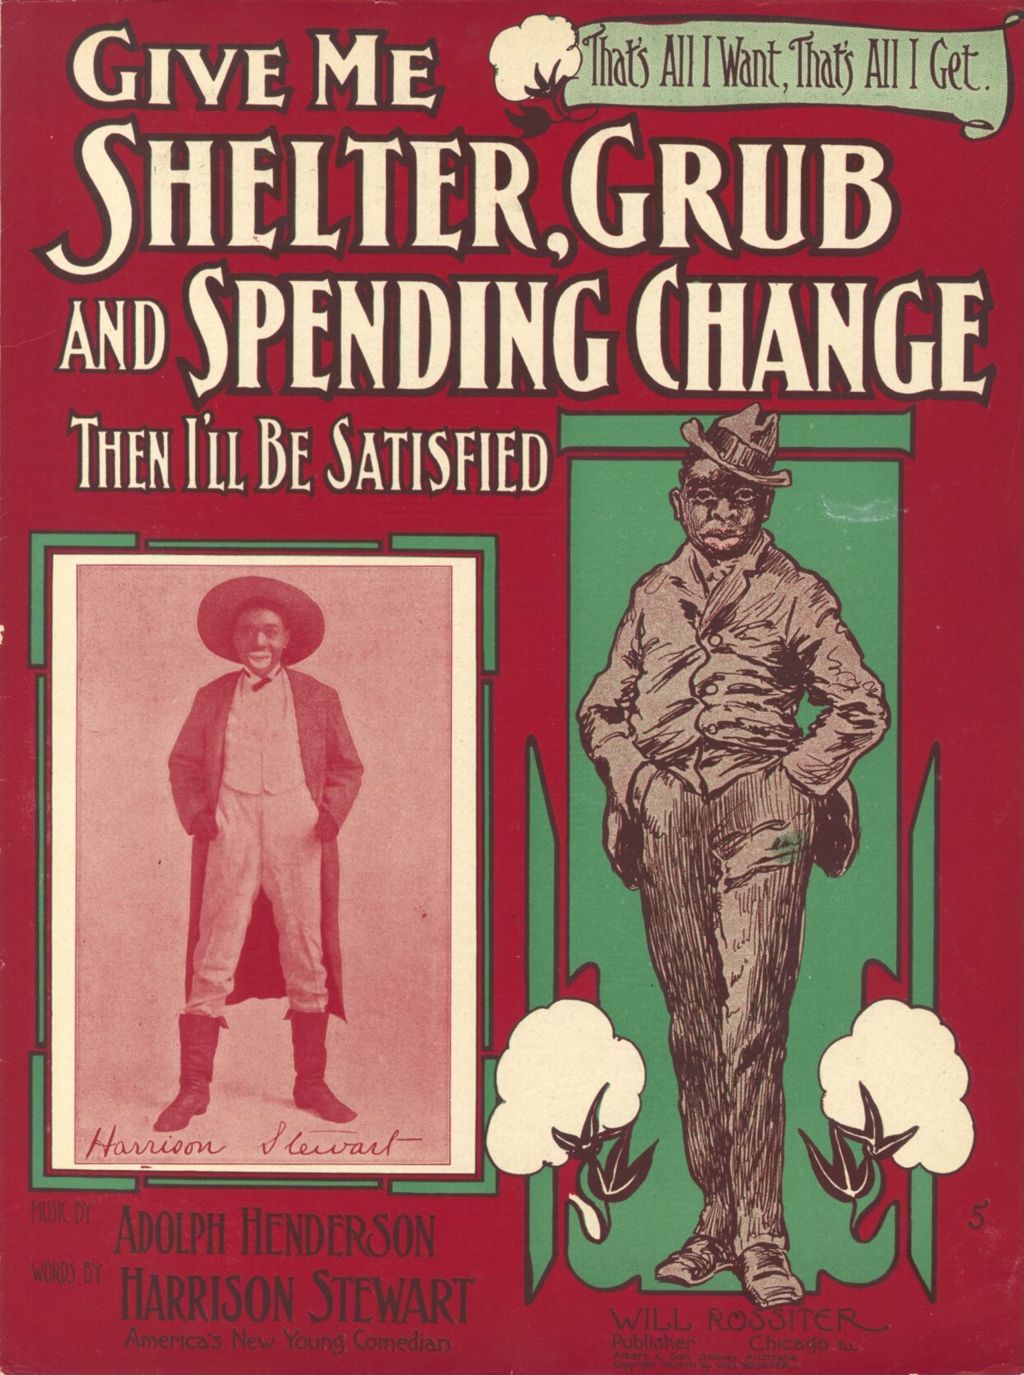 Give Me Shelter, Grub and Spending Change (Then I'll be Satisfied)